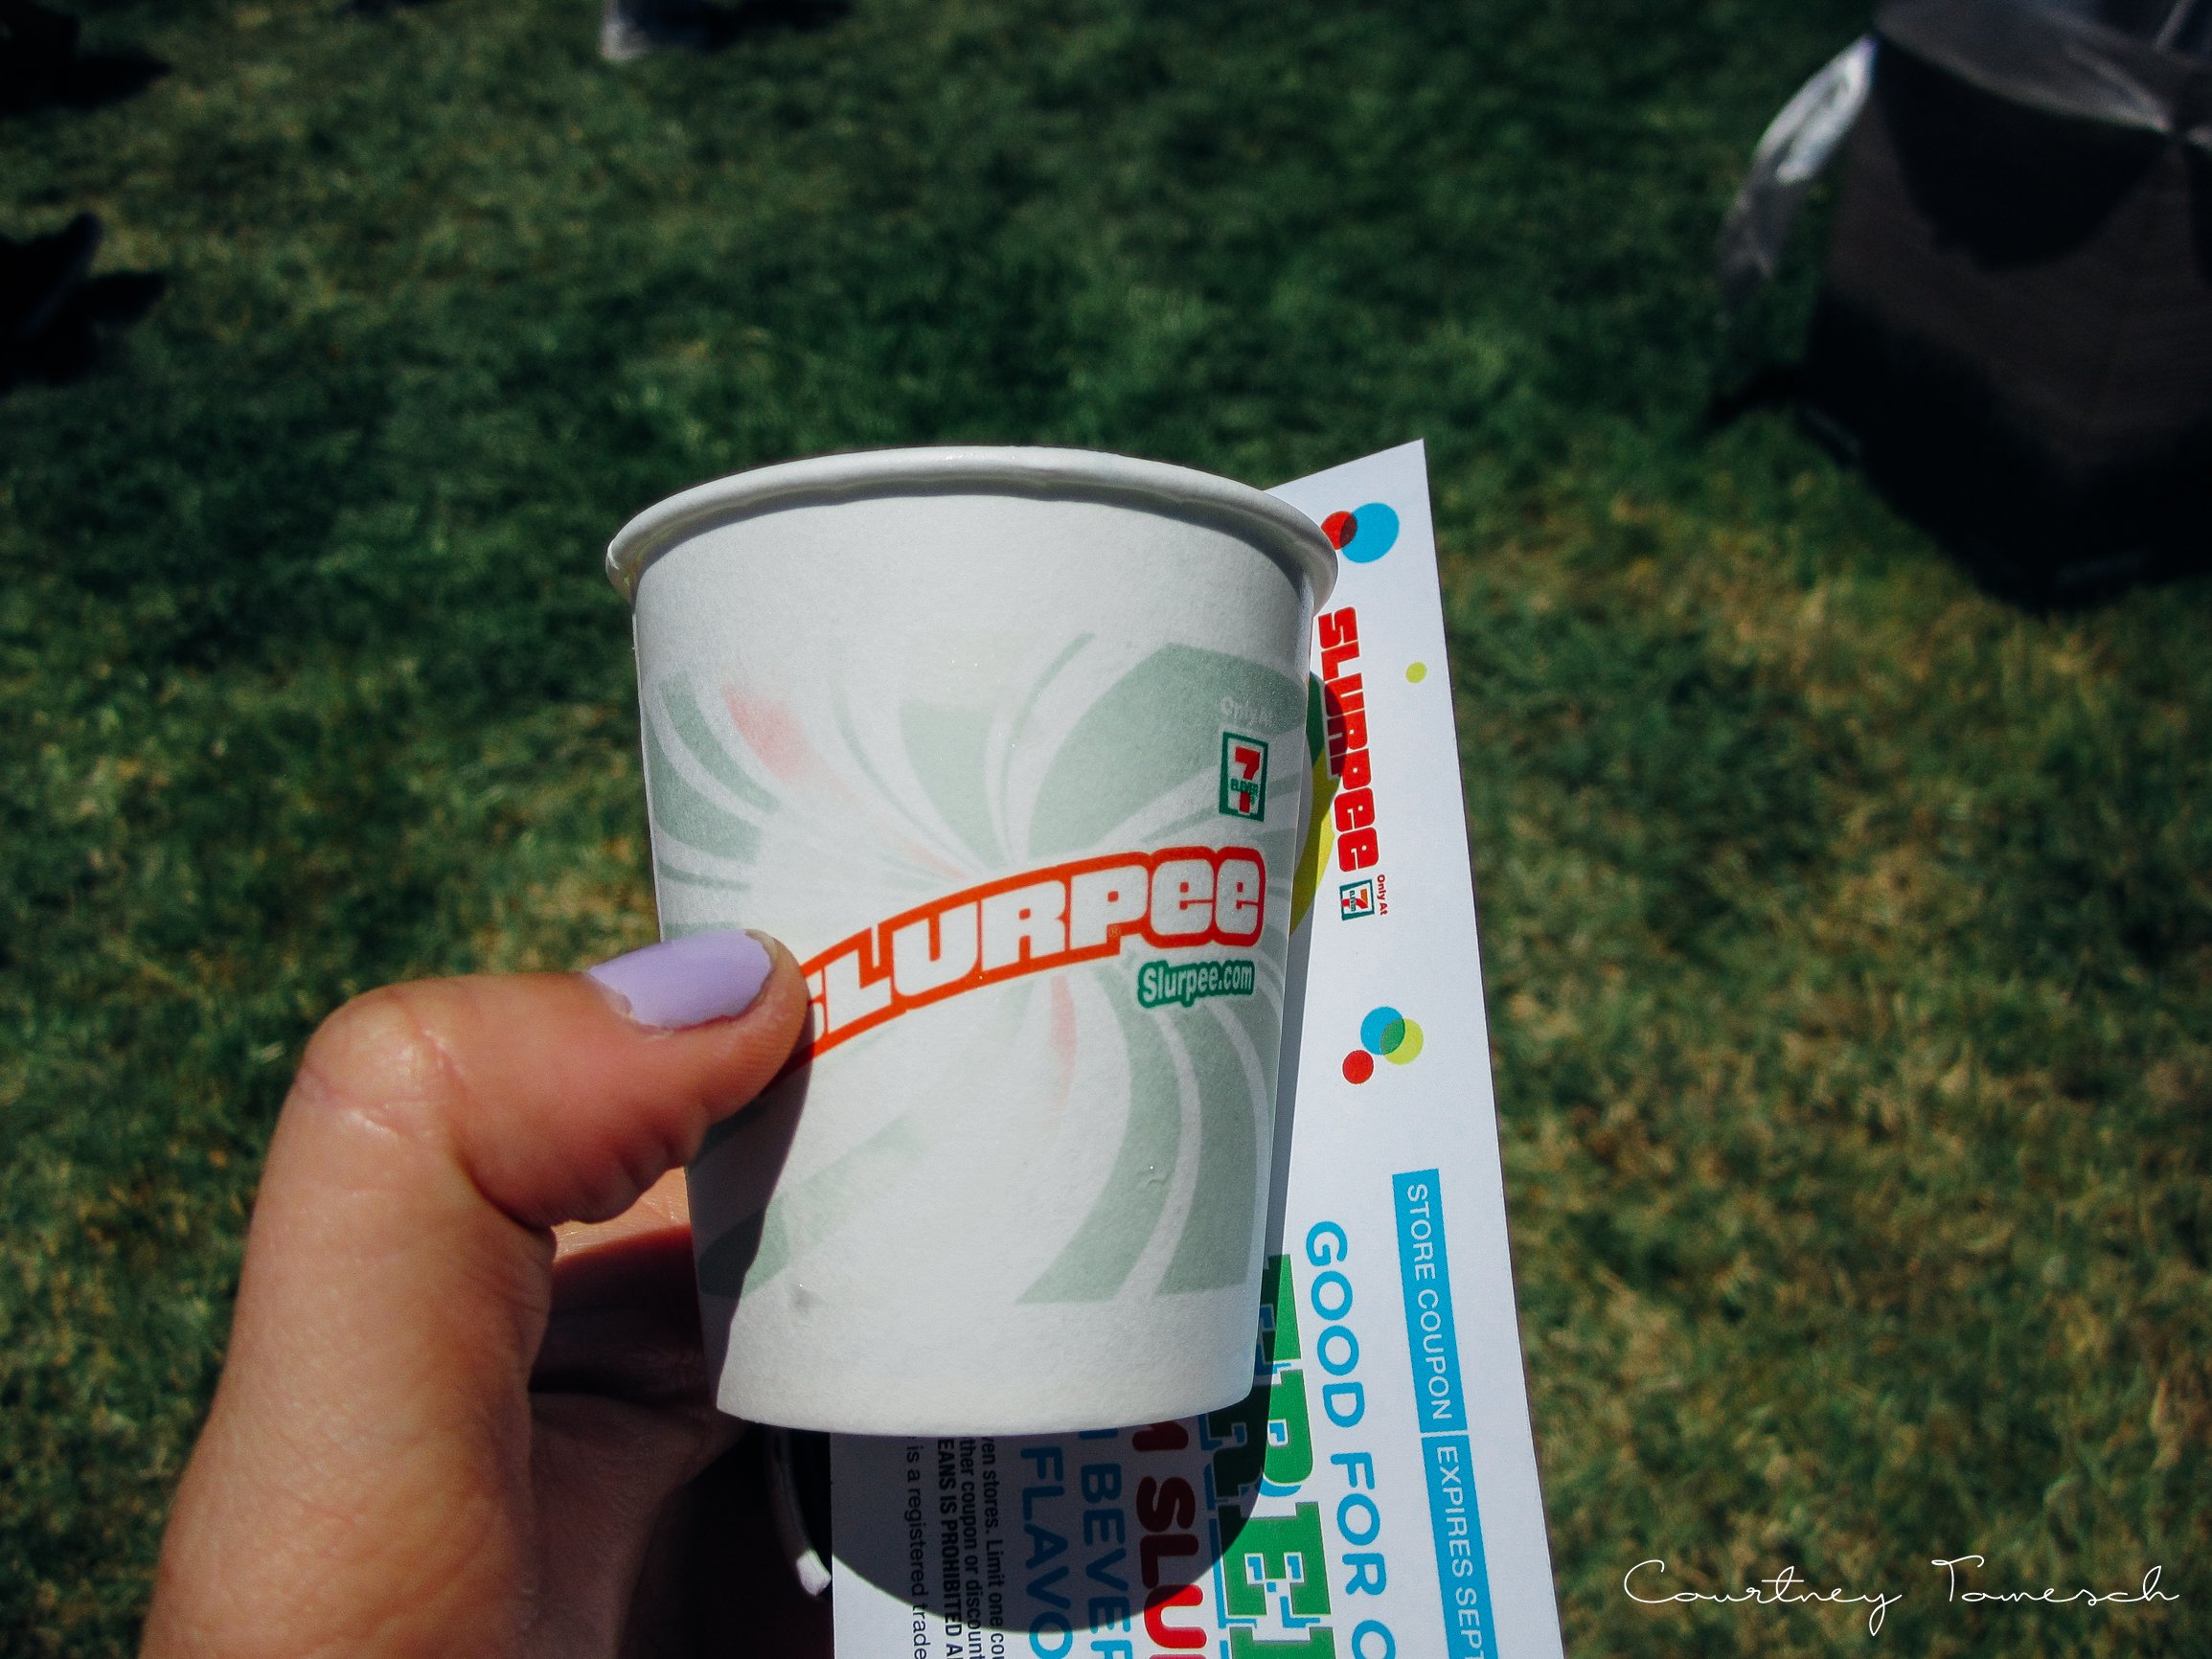  Free Slurpee samples. These were a life saver. It was so hot in Pomona!